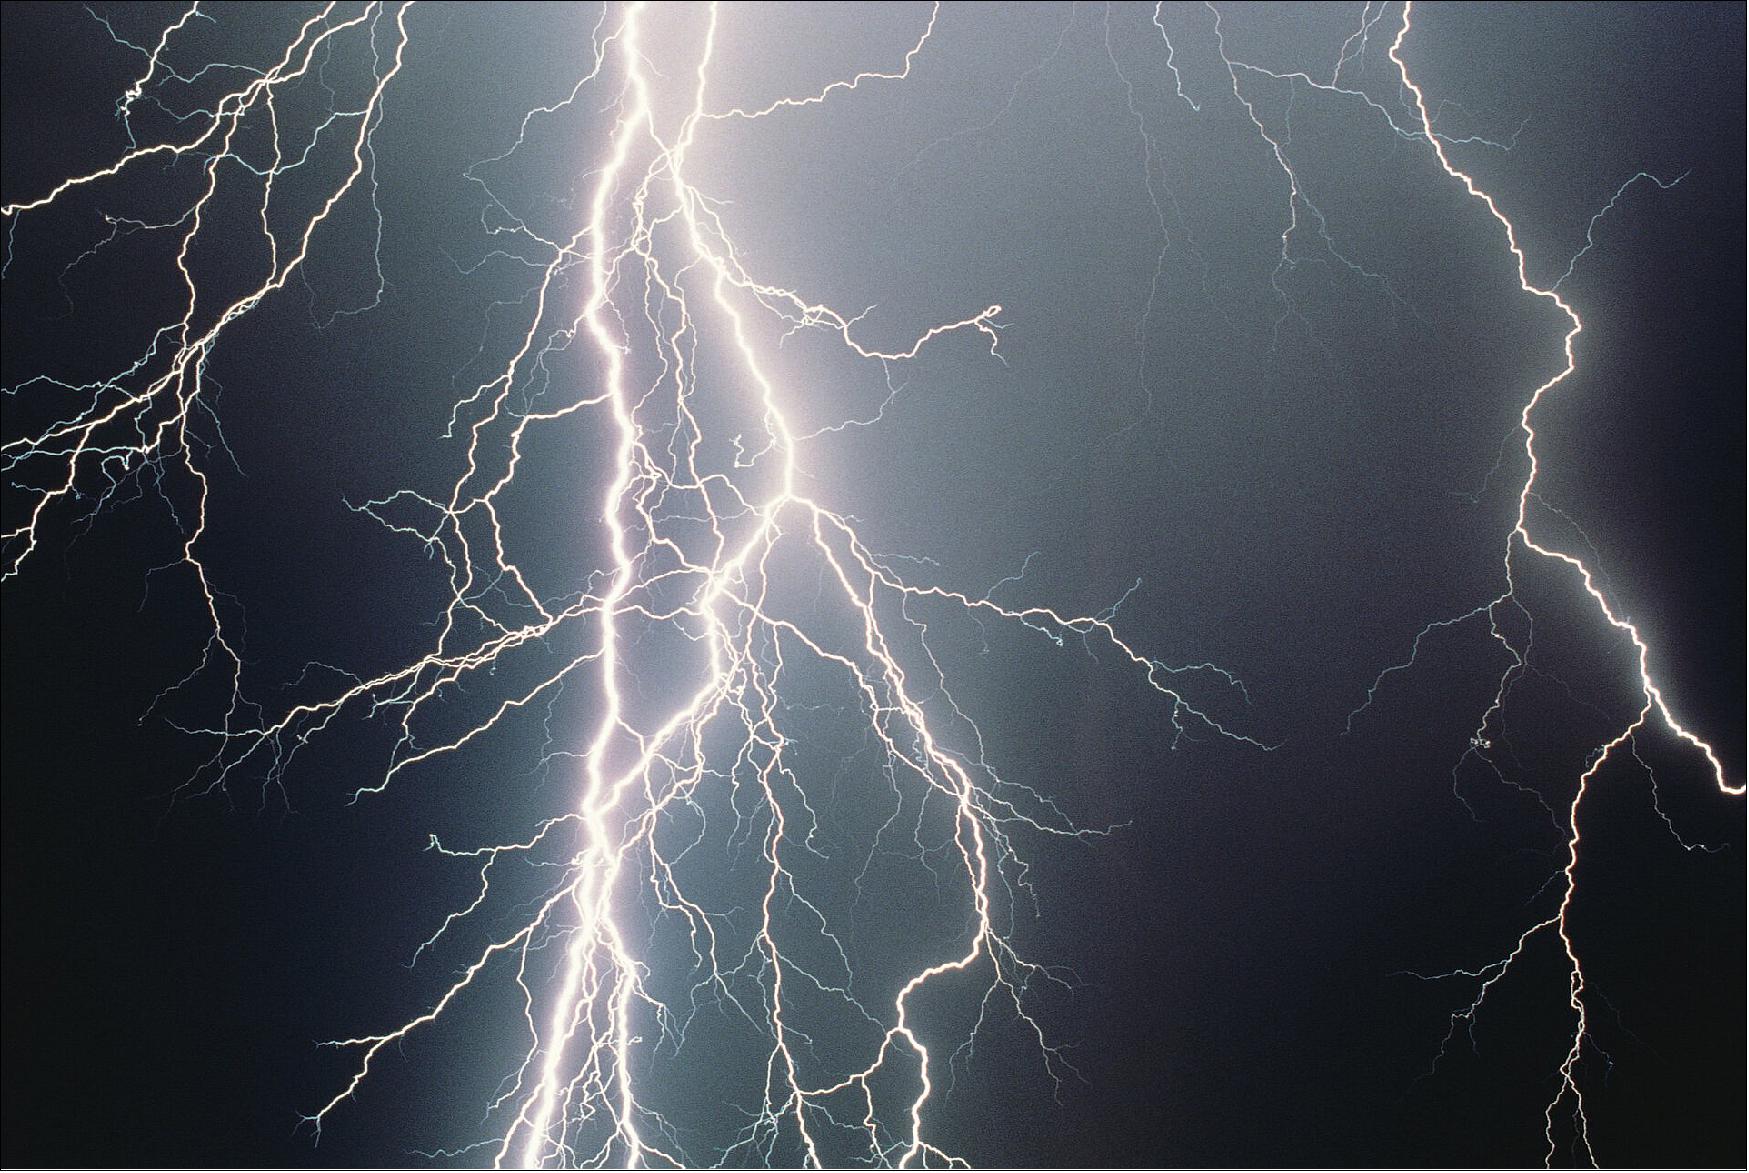 Figure 12: Lightning is an electrical discharge caused by imbalances between storm clouds and the ground, or within the clouds themselves. Most lightning occurs within the clouds. Lightning is one of nature's most common spectacles. Around the world, there are over three million flashes every day, and kills around 2000 people a year. Carried on the Meteosat Third Generation Imager satellites, the Lightning Imager supports a new capability for European meteorological satellites. It provides a continuous monitoring of more than 80% of the Earth disc for lightning discharges taking place either between clouds or from cloud and ground. The detection chain monitors these events, in a narrow spectral band centred on 777 nm, with a detector readout rate of 1 kHz and a spatial resolution around 10 km (image credit: ESA)